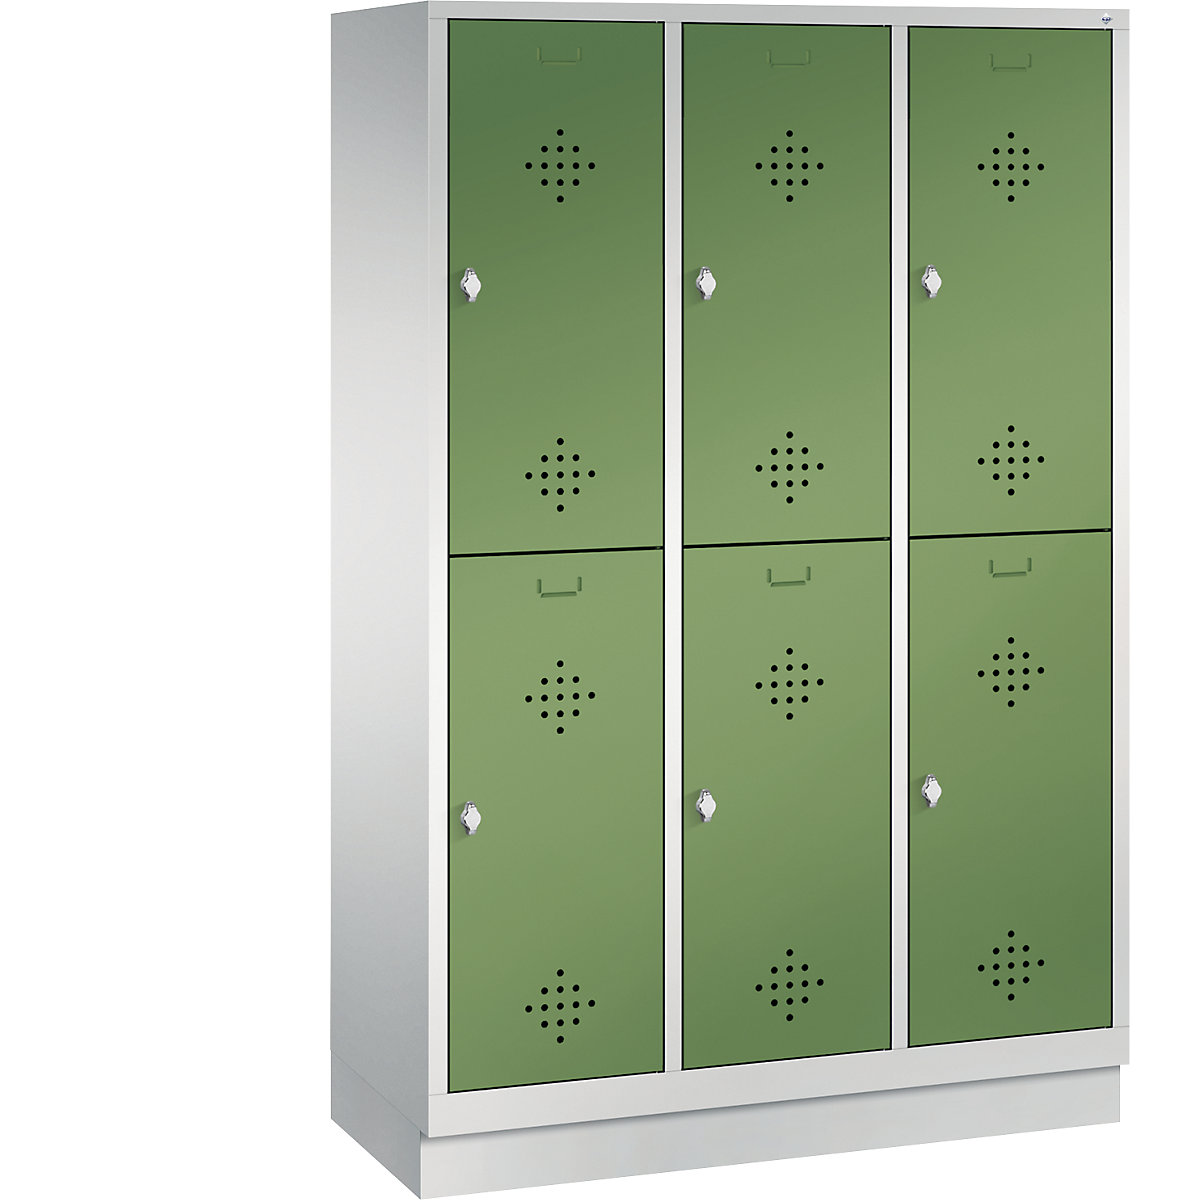 CLASSIC cloakroom locker with plinth, double tier – C+P, 3 compartments, 2 shelf compartments each, compartment width 400 mm, light grey / reseda green-14